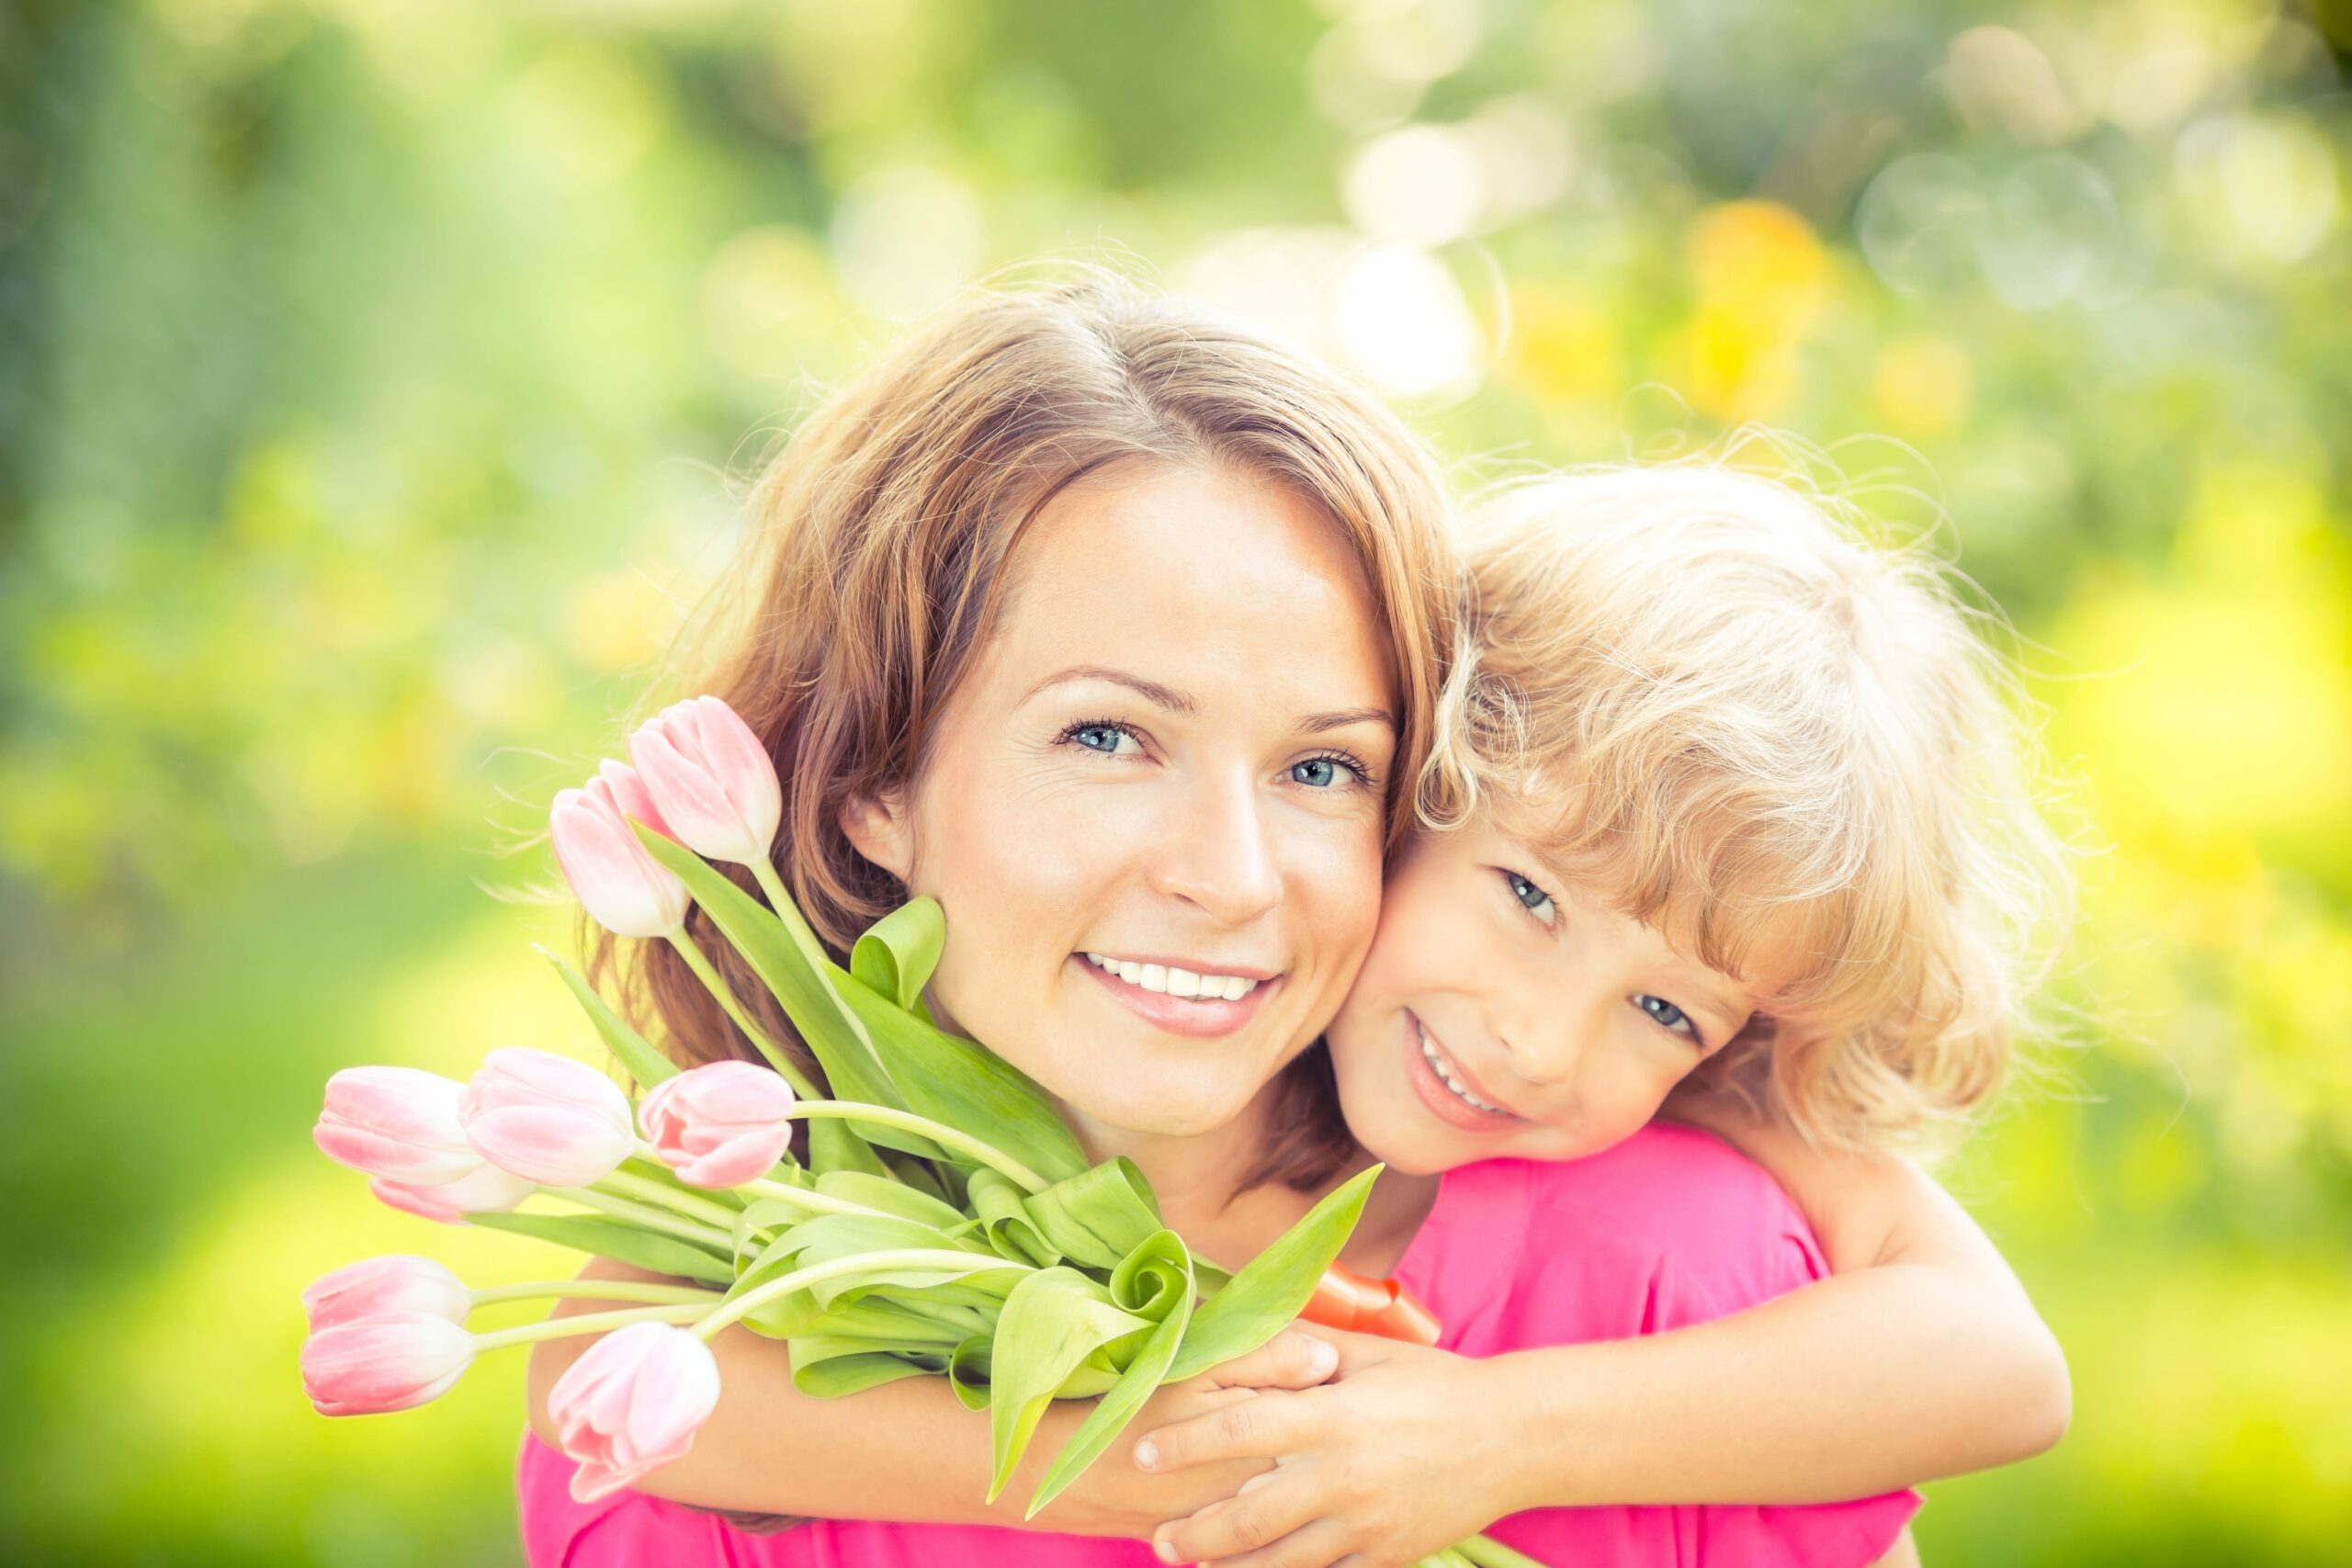 HOW TO COPE WITH MOTHER'S DAY IF YOU'VE LOST YOUR MUM/MOTHERLY FIGURE